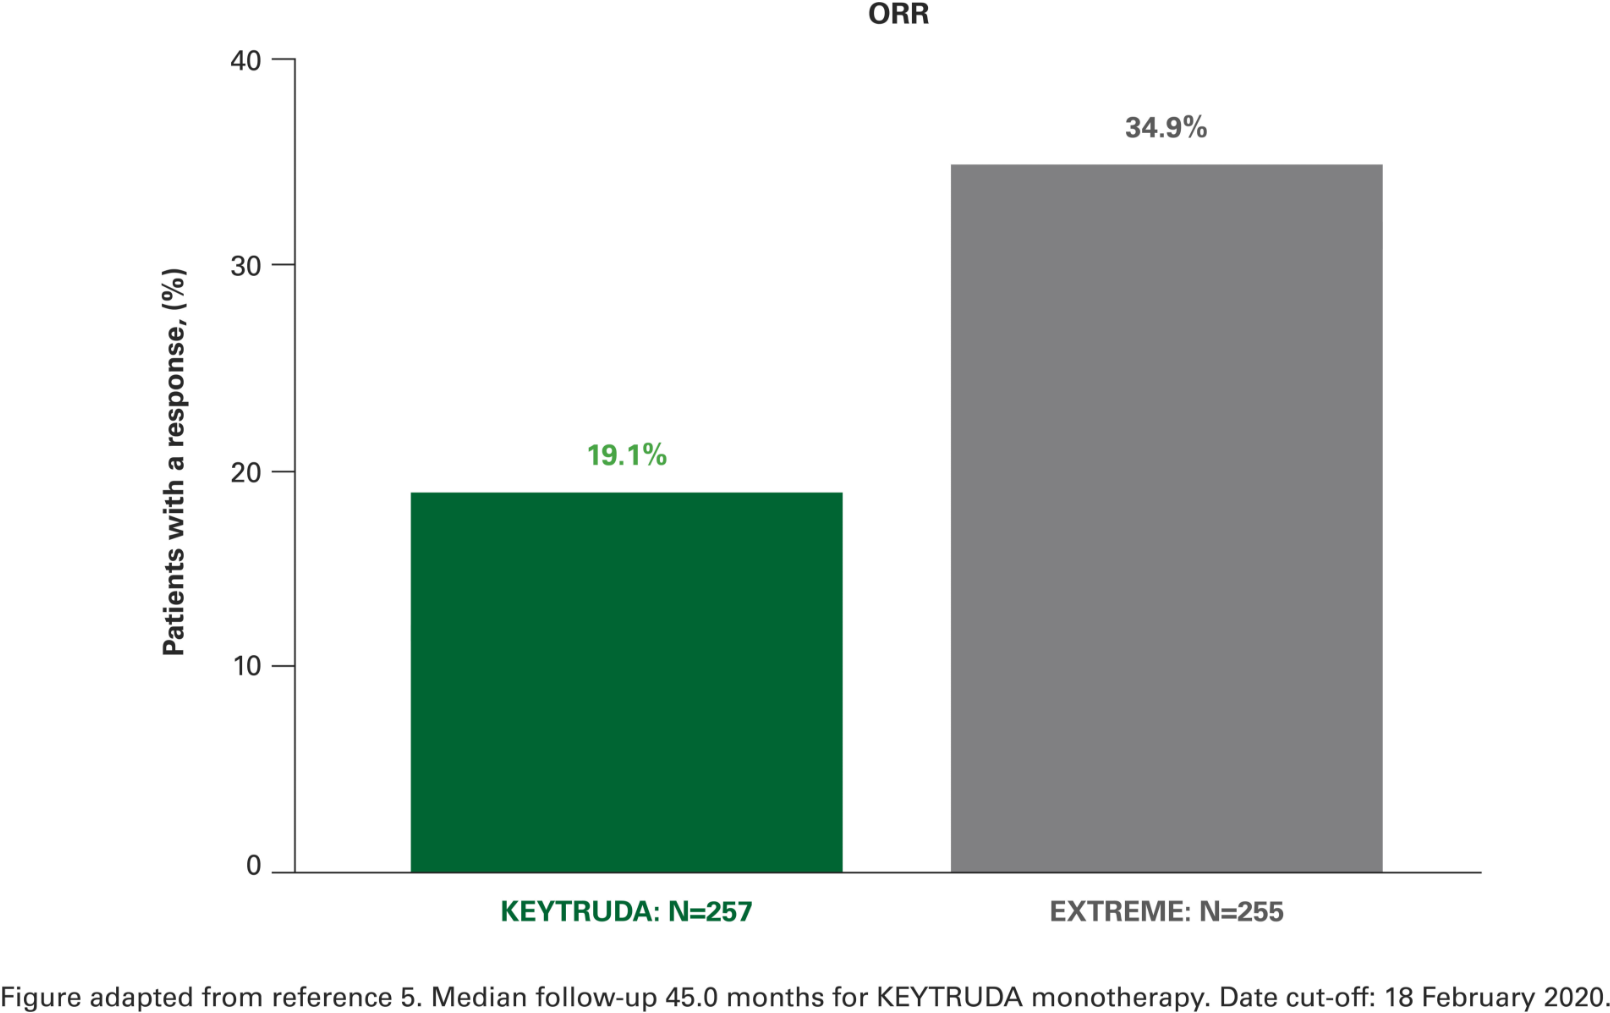 Bar chart of overall response rates for HNSCC patients at 4 years in KEYNOTE 048 for KEYTRUDA (pembrolizumab) vs EXTREME